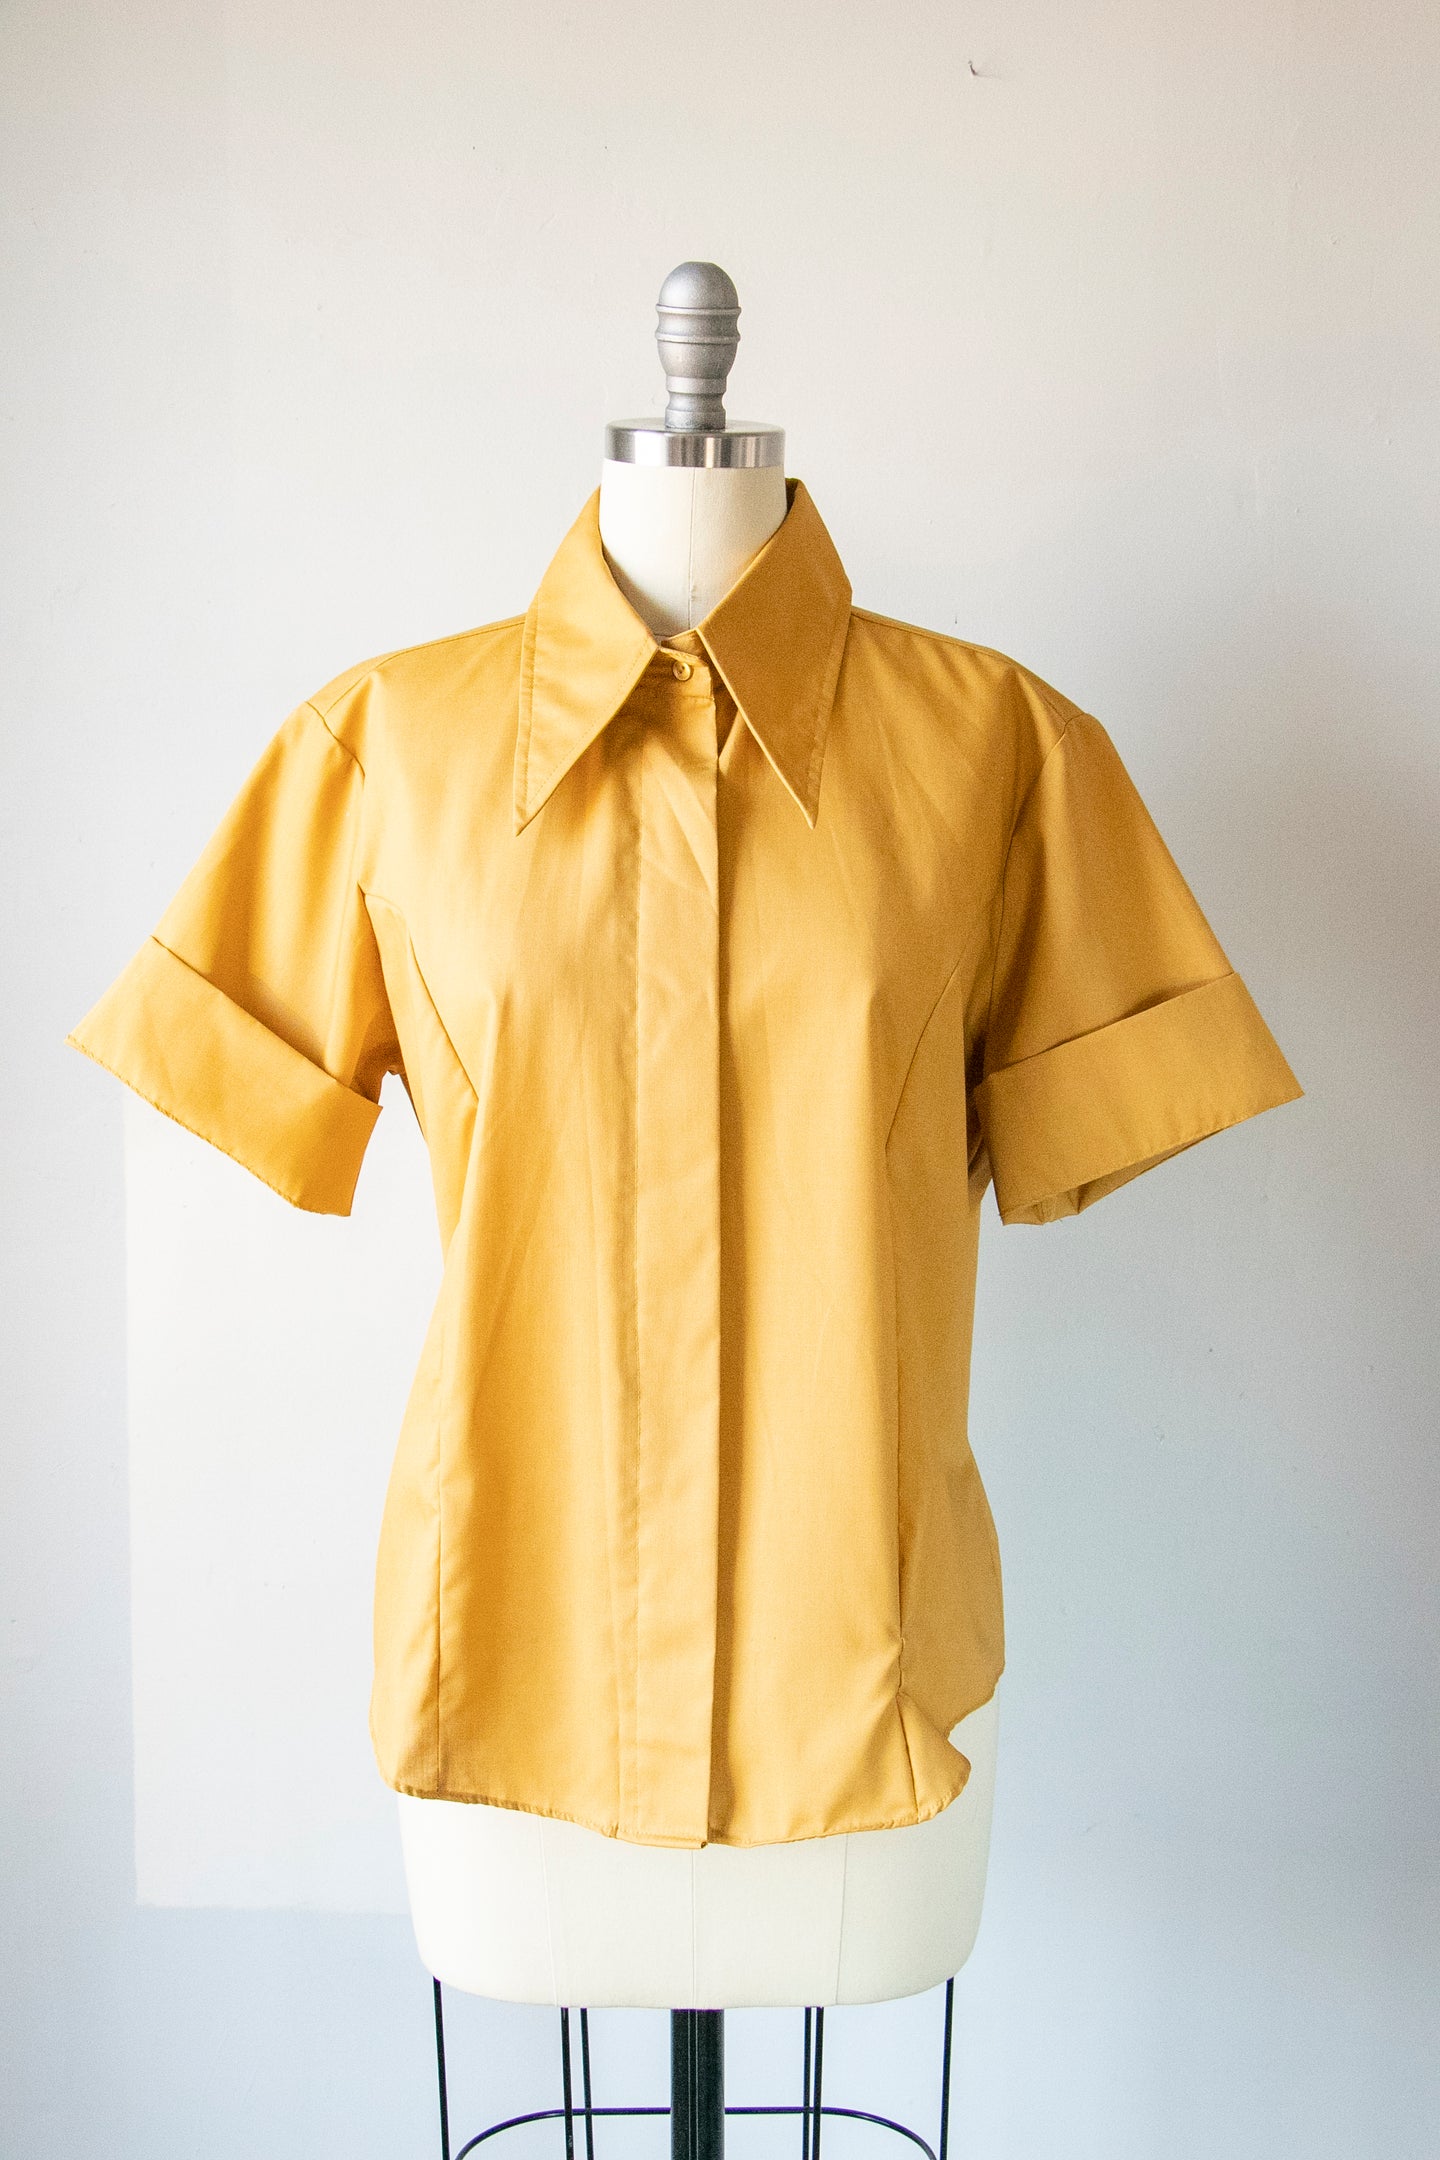 1960s Blouse Short Sleeve Top M